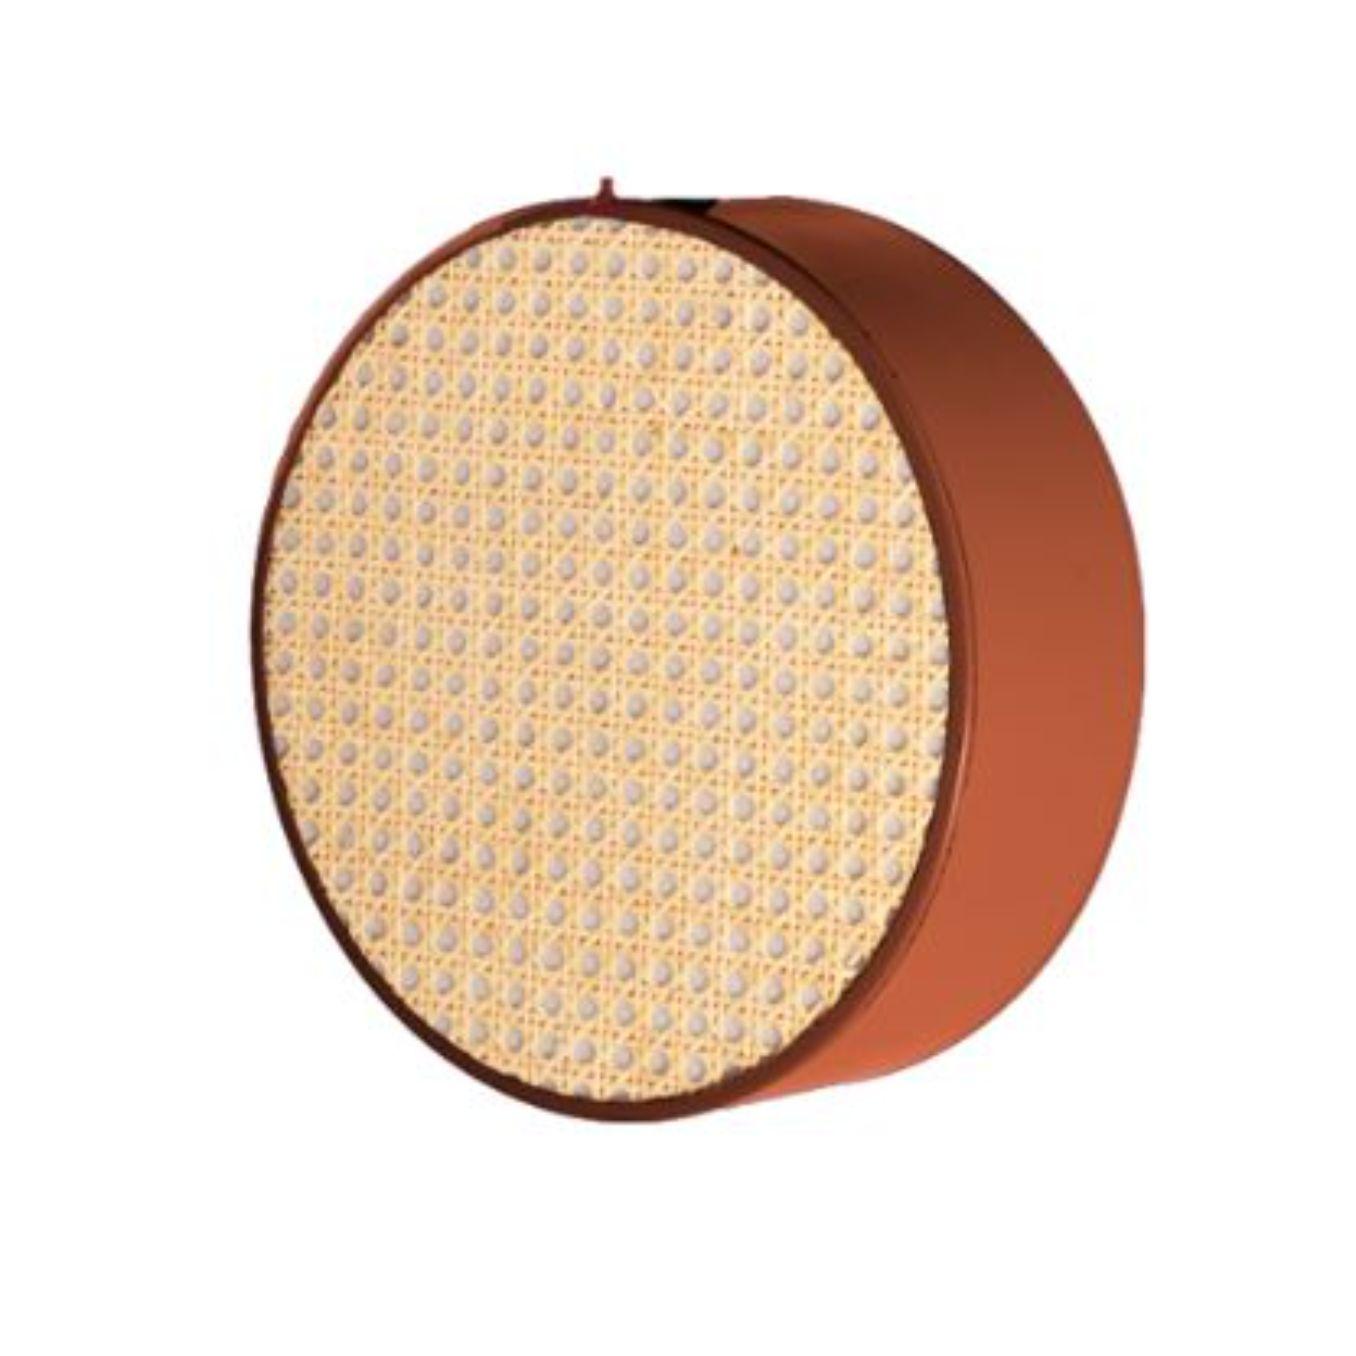 45 Monaco wall I lamp by Dooq
Dimensions: W 45 x D 45 x H 9 cm
Materials: lacquered metal, rattan, terrazzo.
Also available in different dimensions.

Information:
230V/50Hz
2 x max. G9
4W LED

120V/60Hz
2 x max. G9
4W LED

Cable: